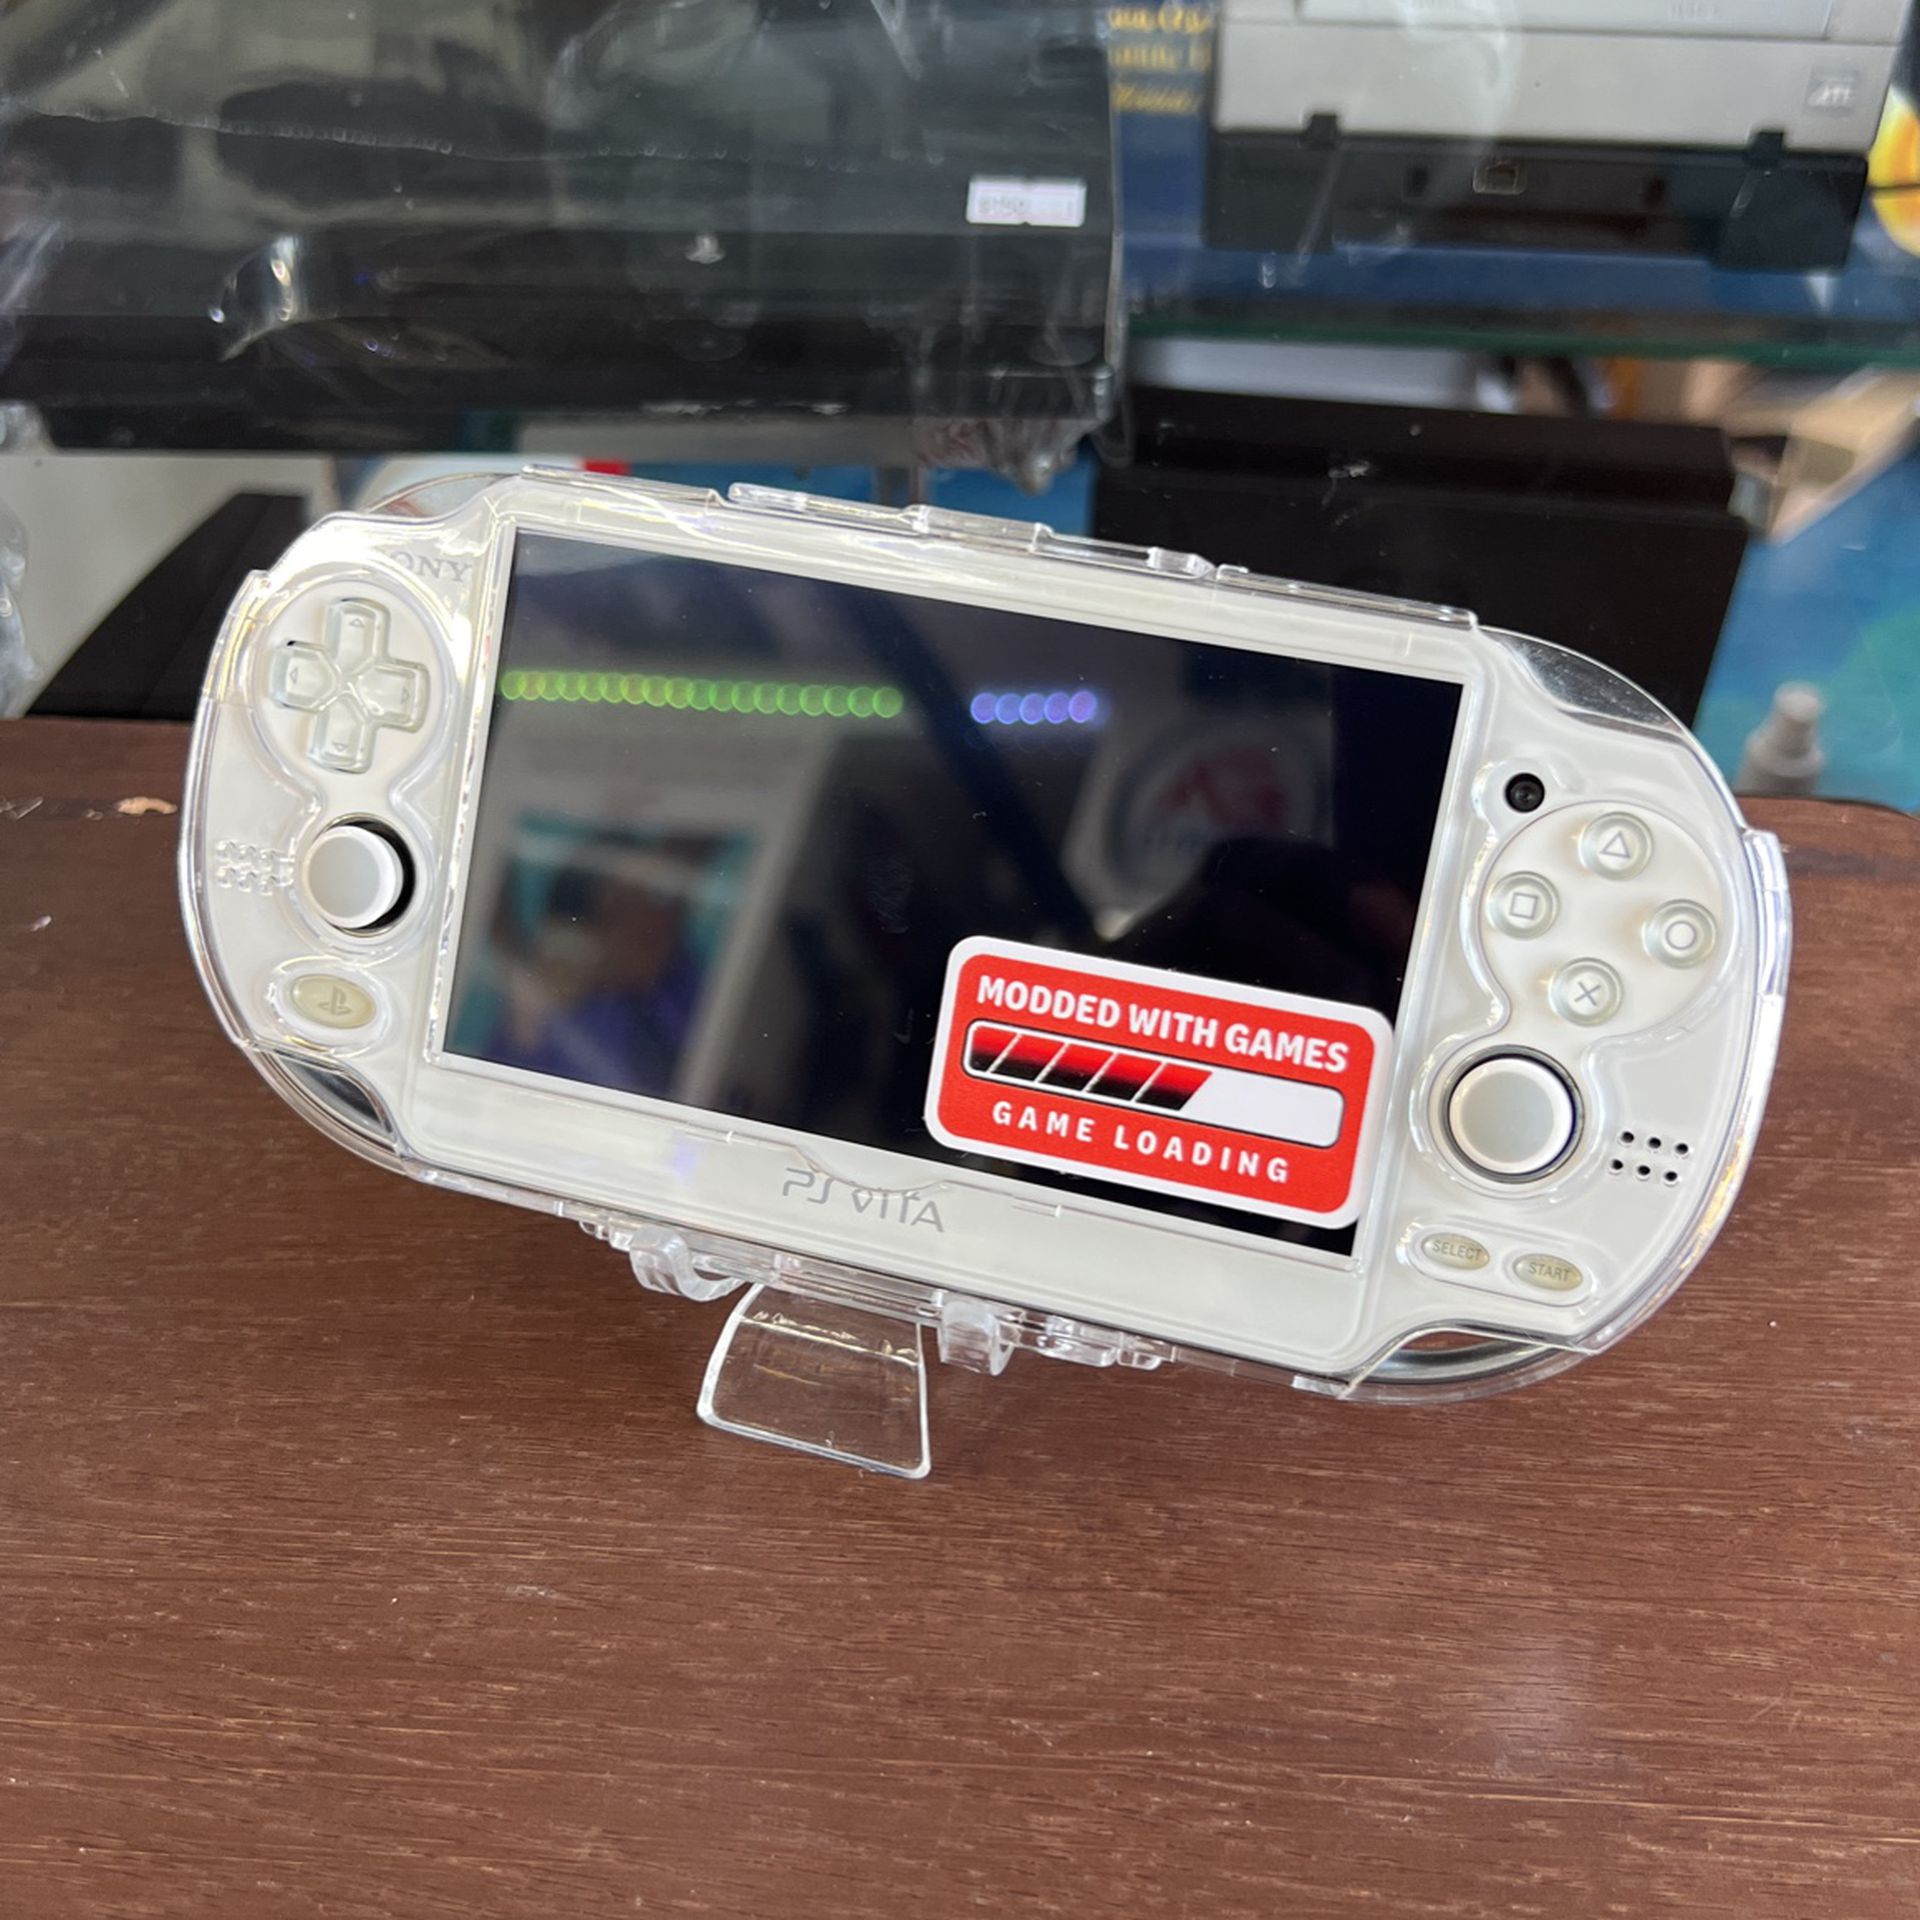 PS Vita - White Modded w/Games *TRADE IN YOUR GAMES OR CARDS FOR CREDIT*